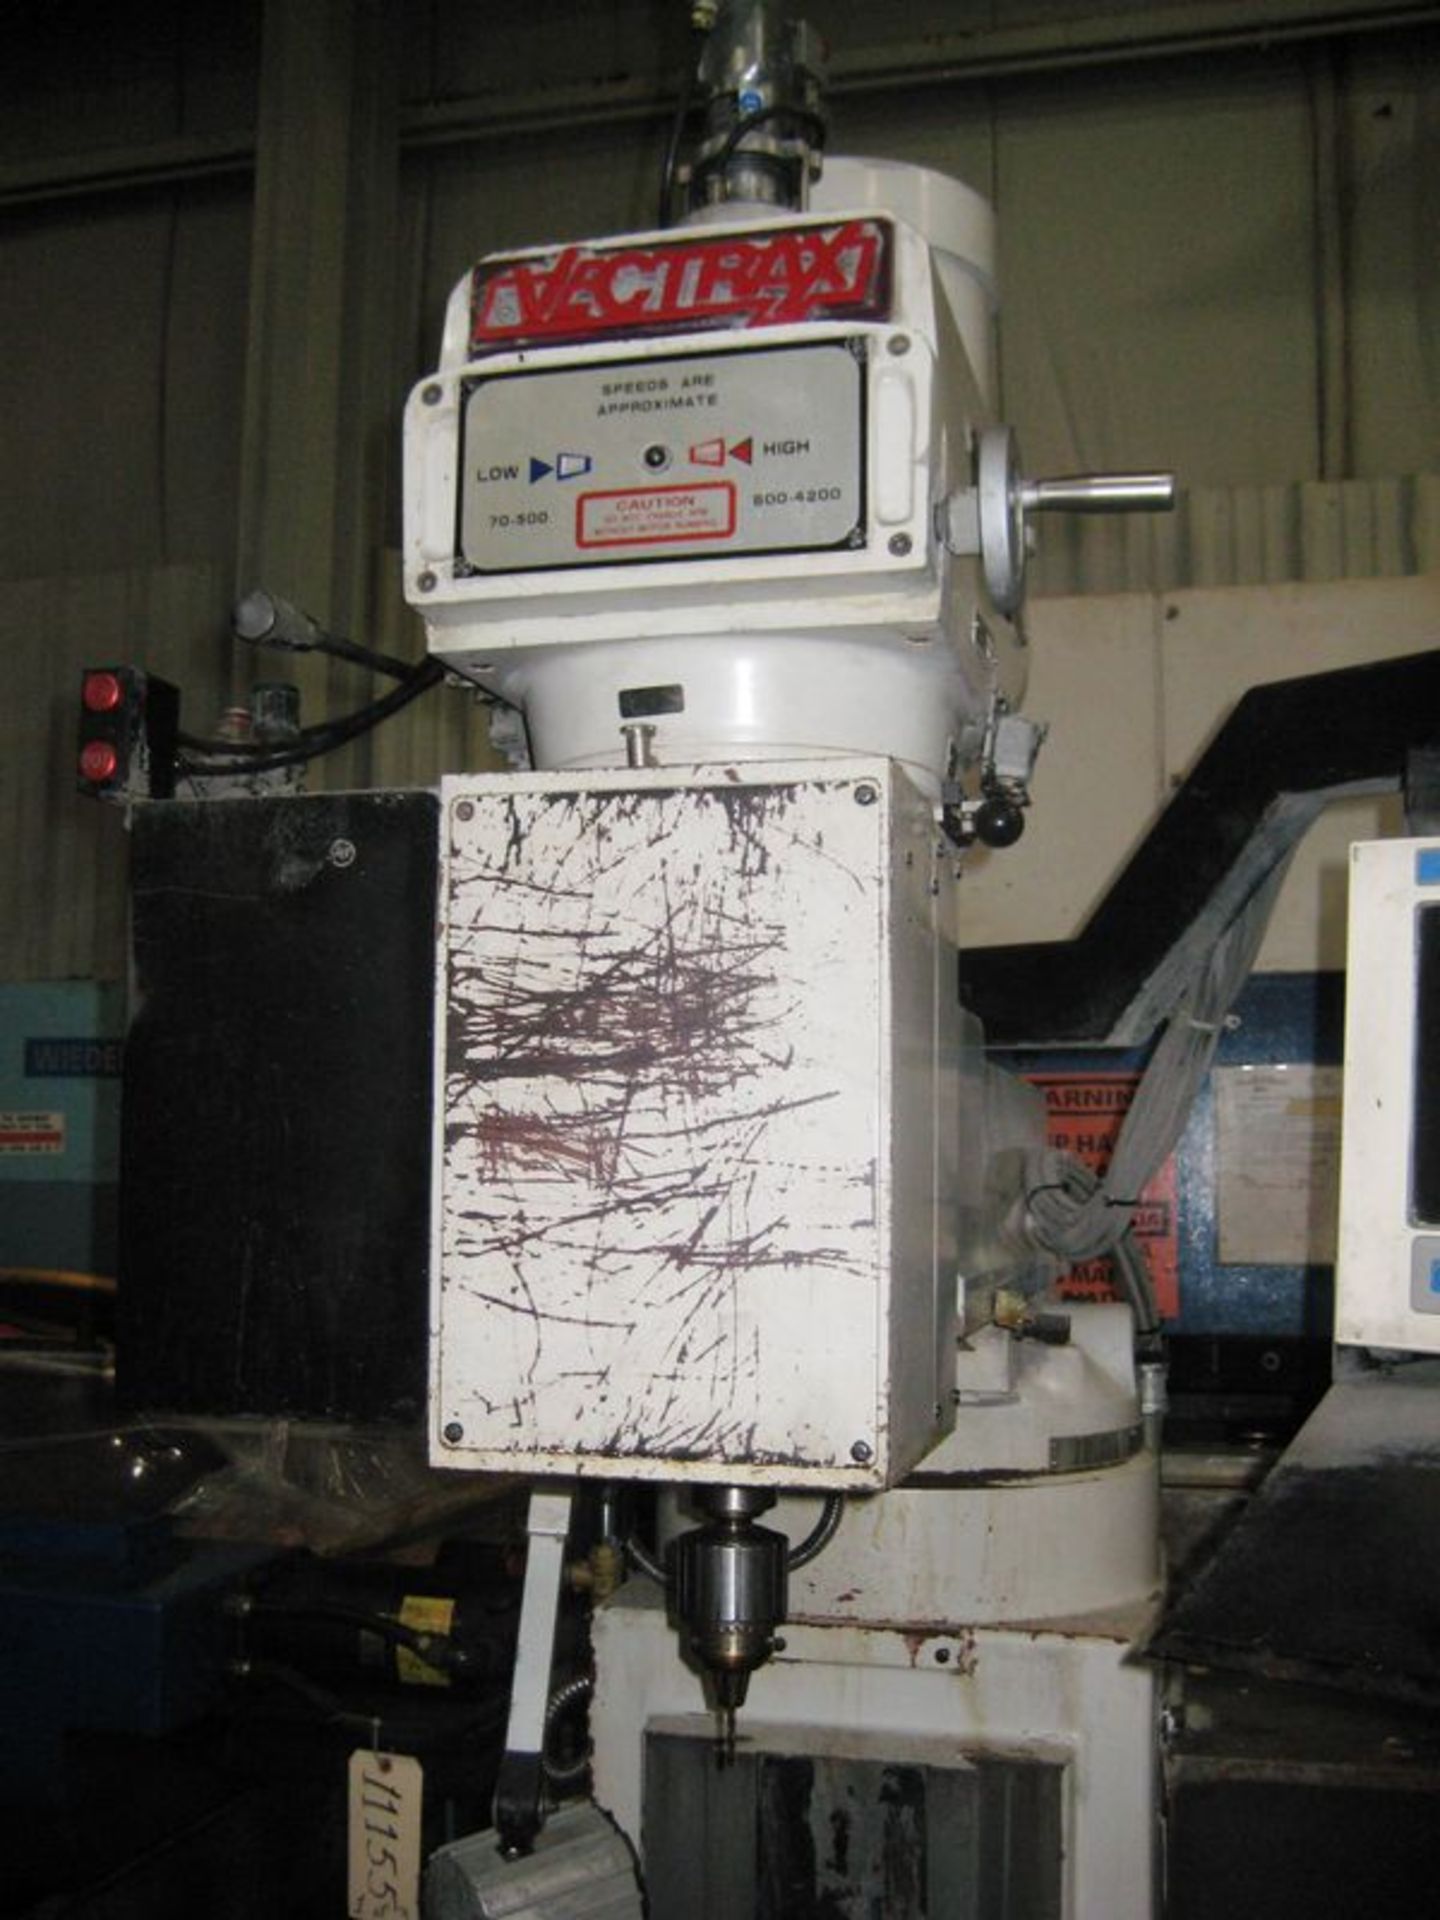 Vectrax GS-N16V 3-Axis CNC Knee Type Milling Machine, S/N 9030192NV, New 2001 - Image 5 of 5